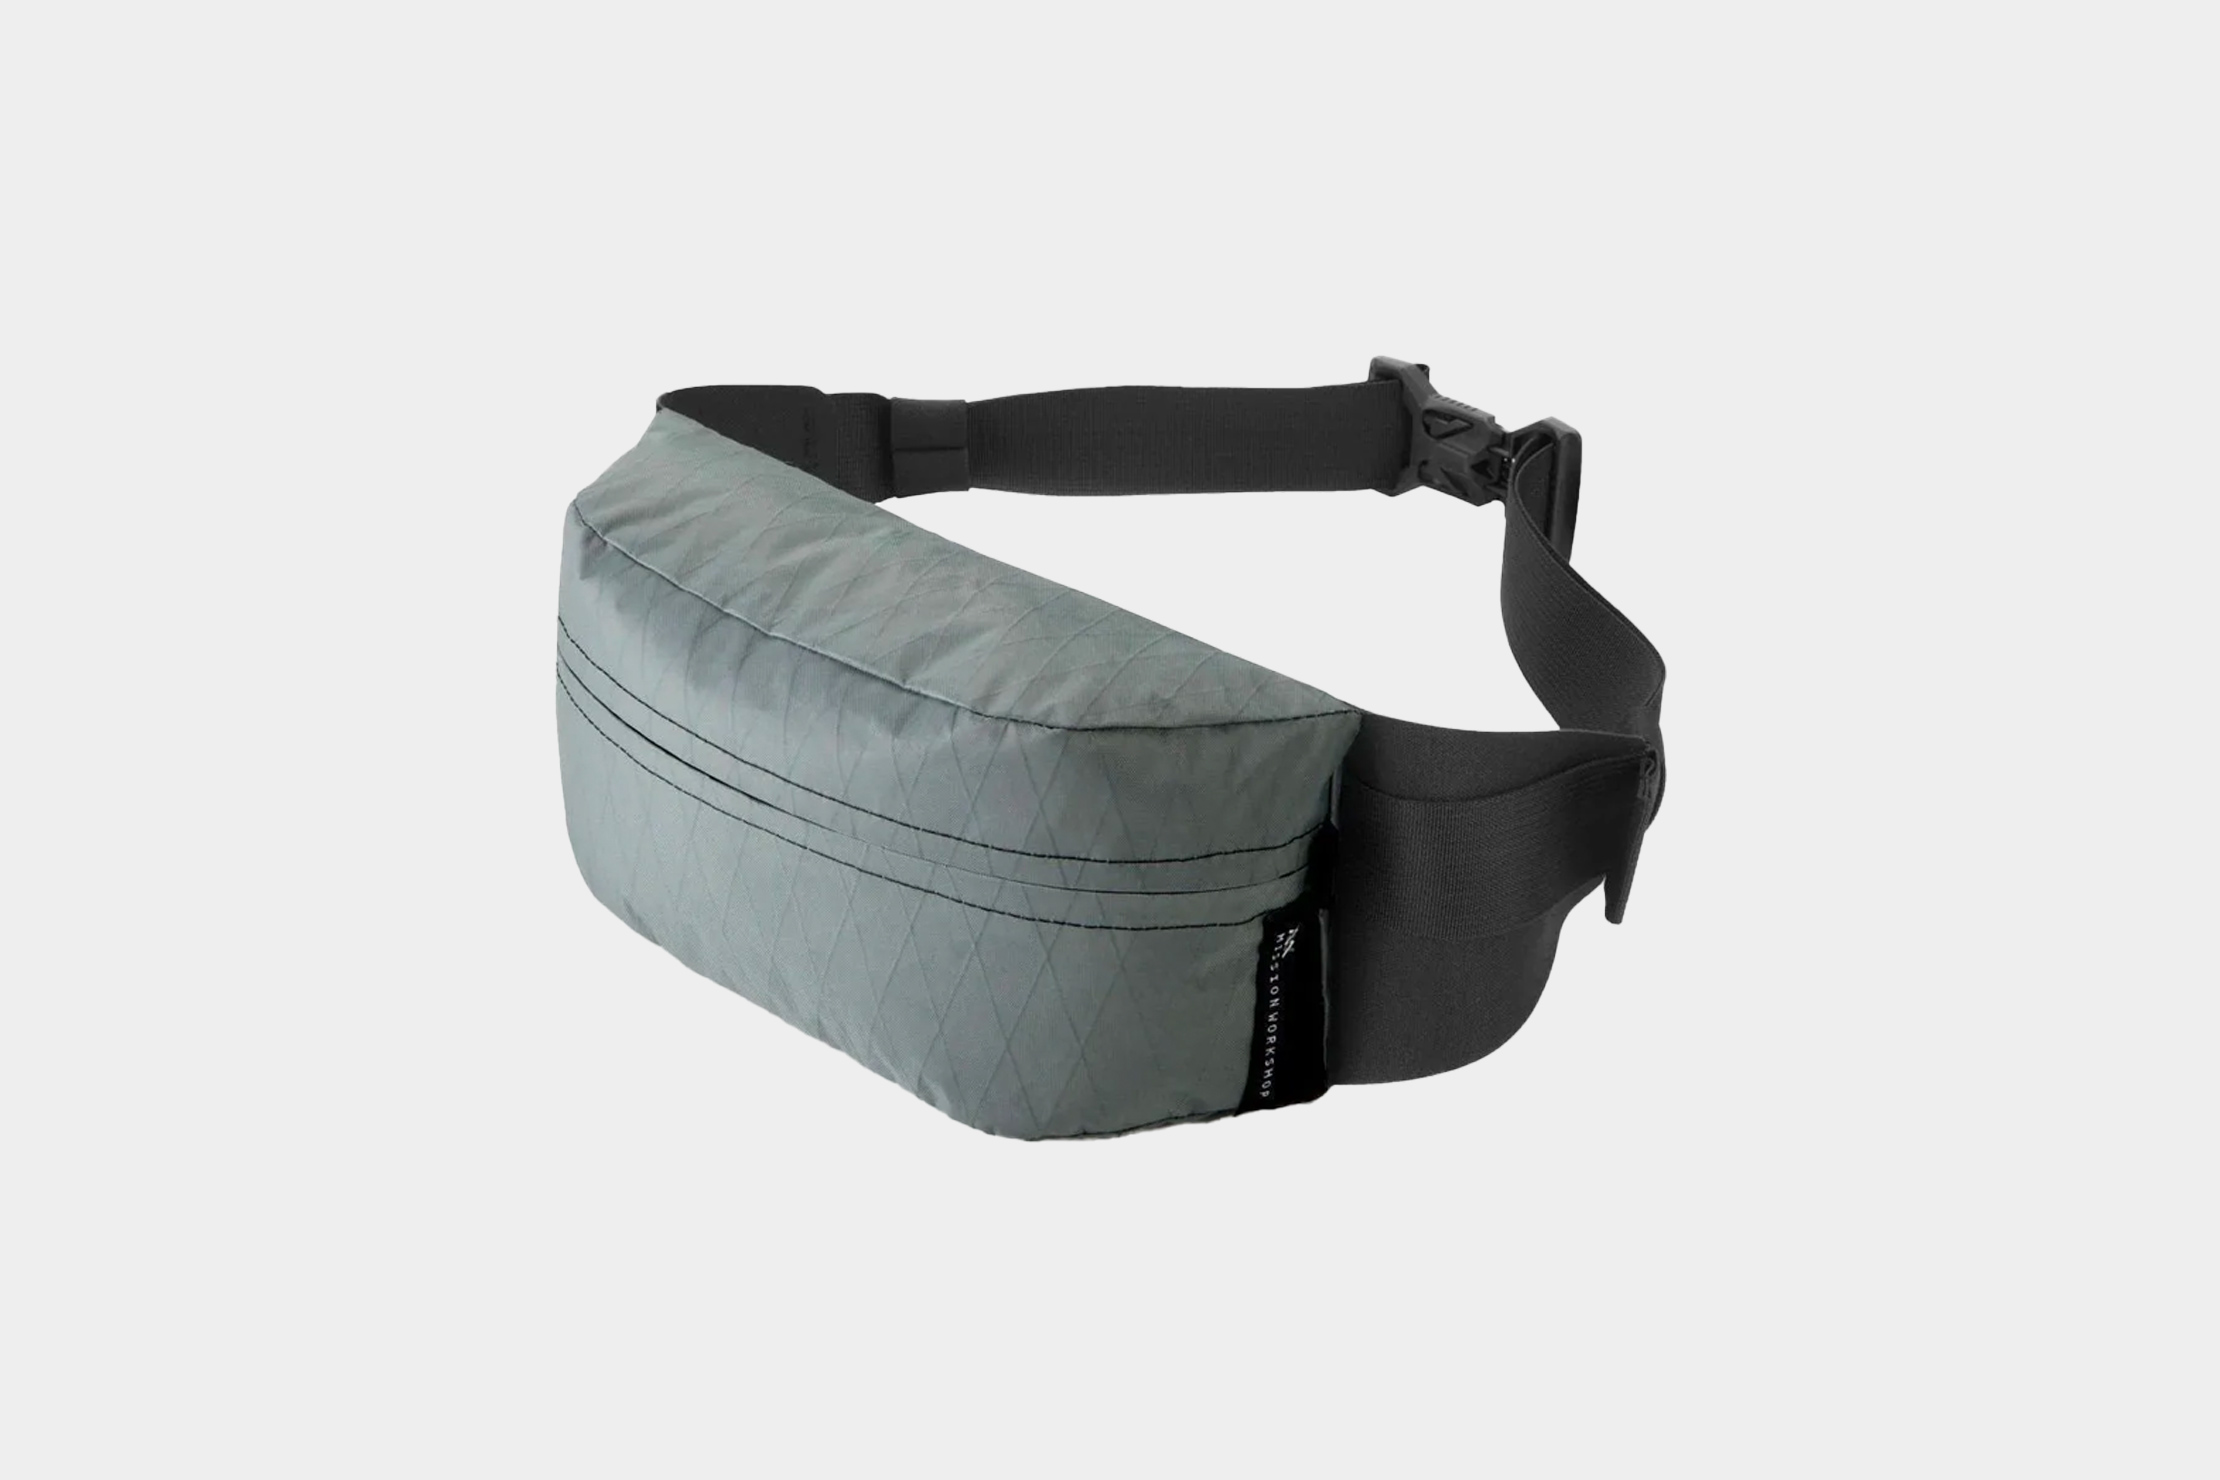 Mission Workshop Axis Modular Waist Pack Review | Pack Hacker